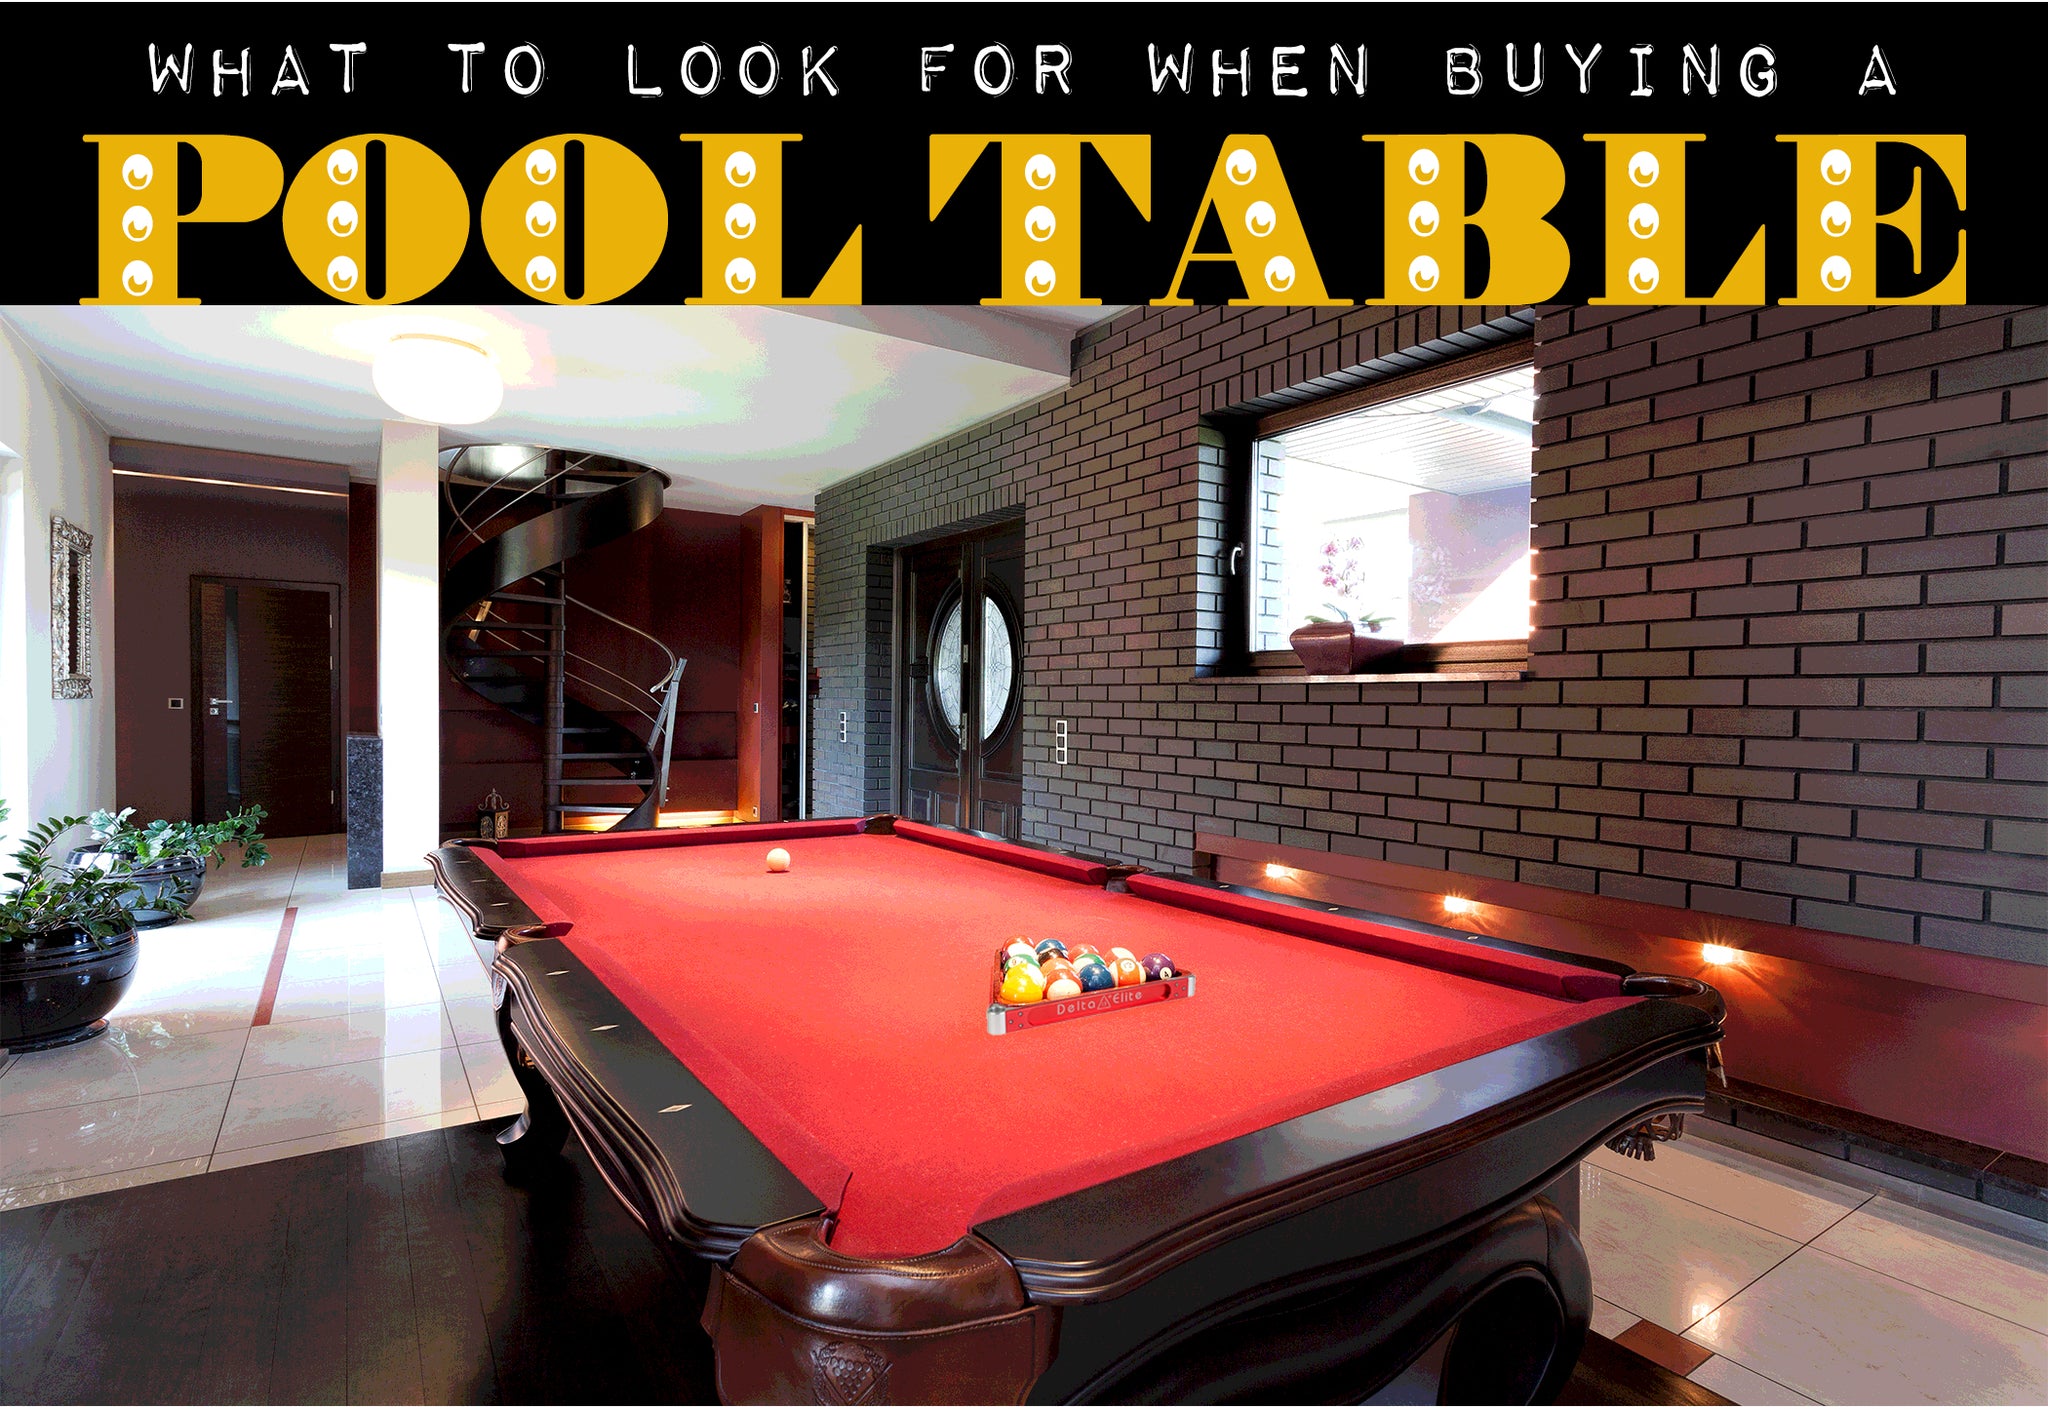 Purchasing a pool table